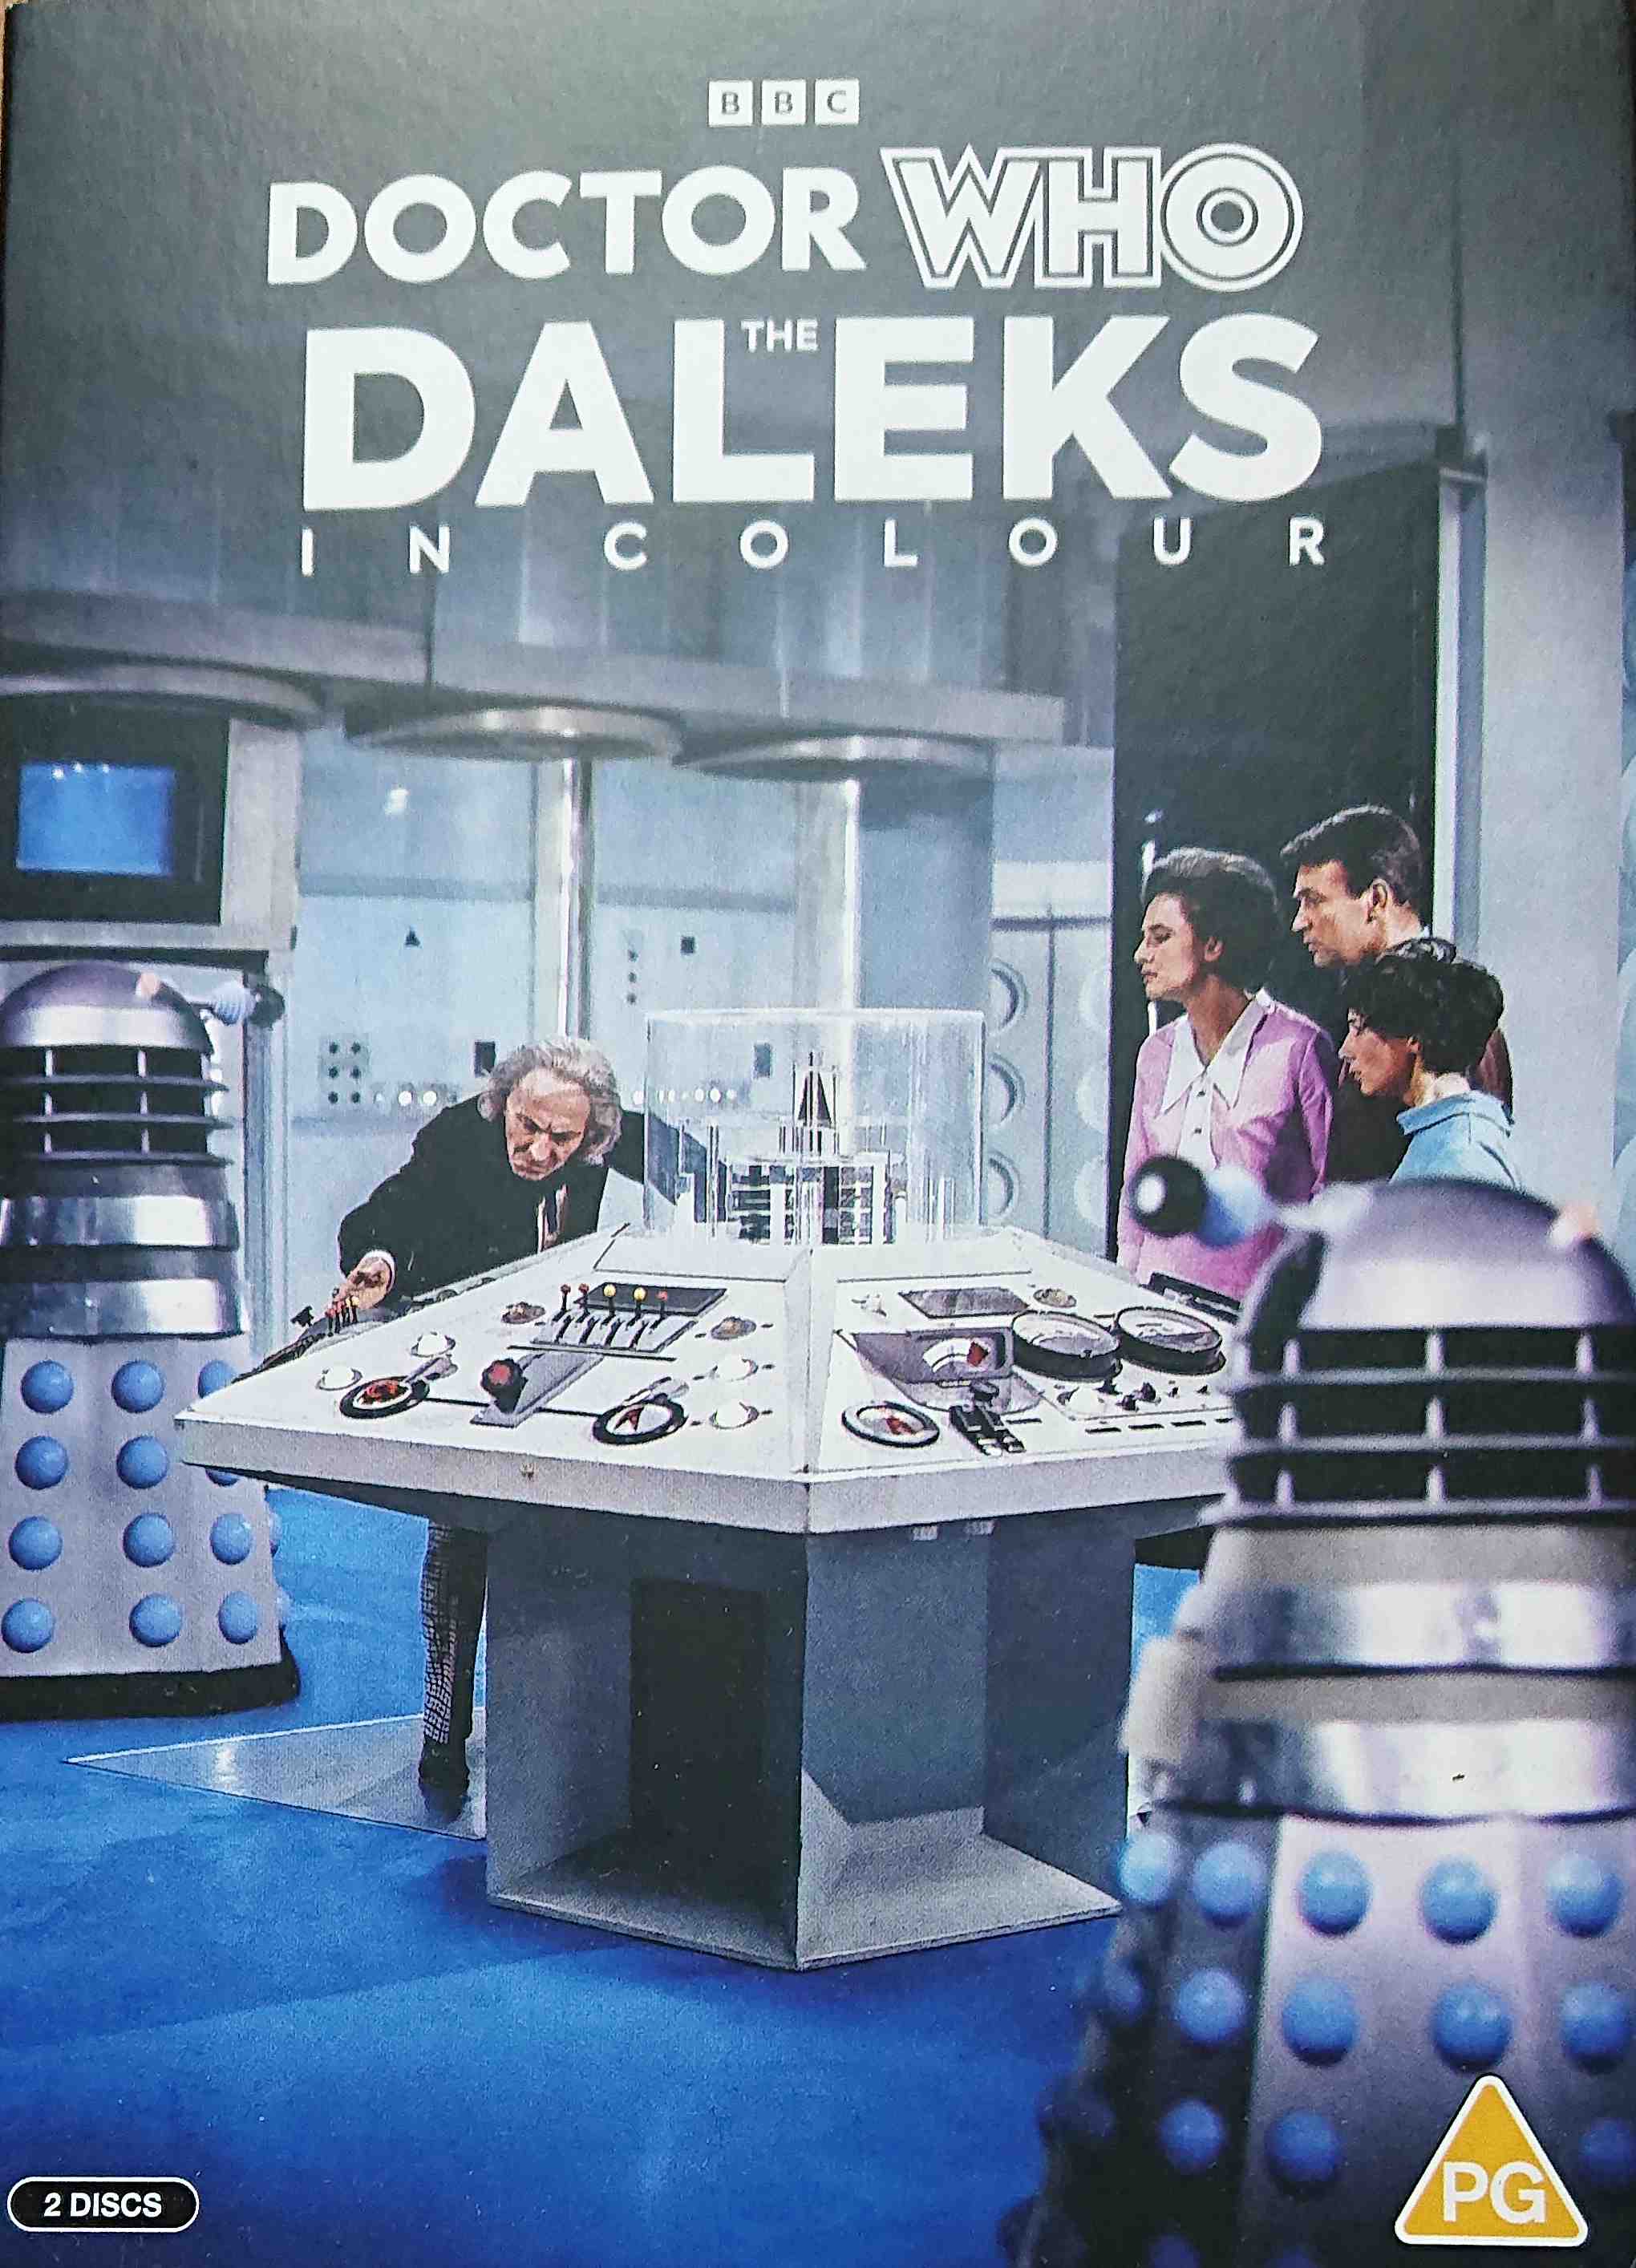 Picture of Doctor Who - The Daleks - In colour by artist Terry Nation from the BBC dvds - Records and Tapes library